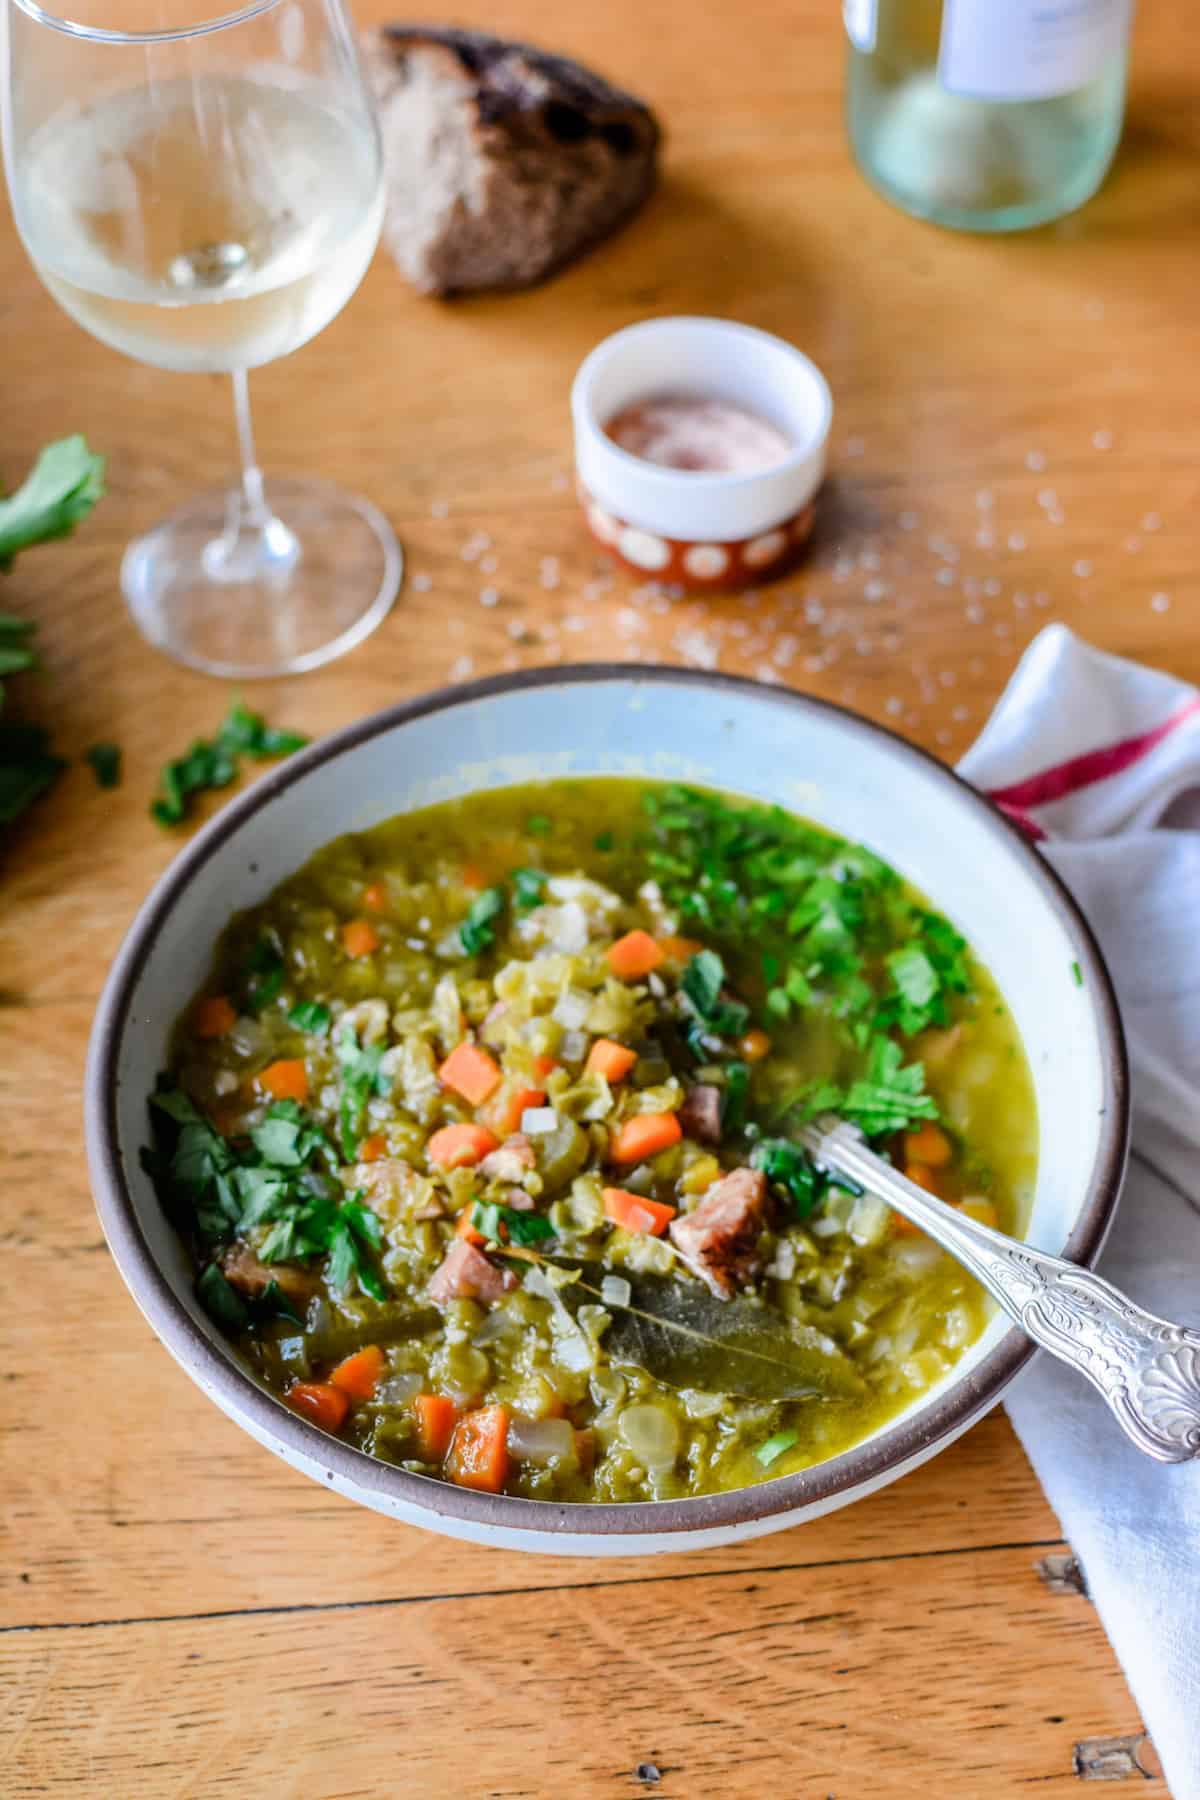 Not your traditional Mexican soup, but our family loves it in the winter time. Hearty and filling with creamy split peas and hunks of smoked ham.